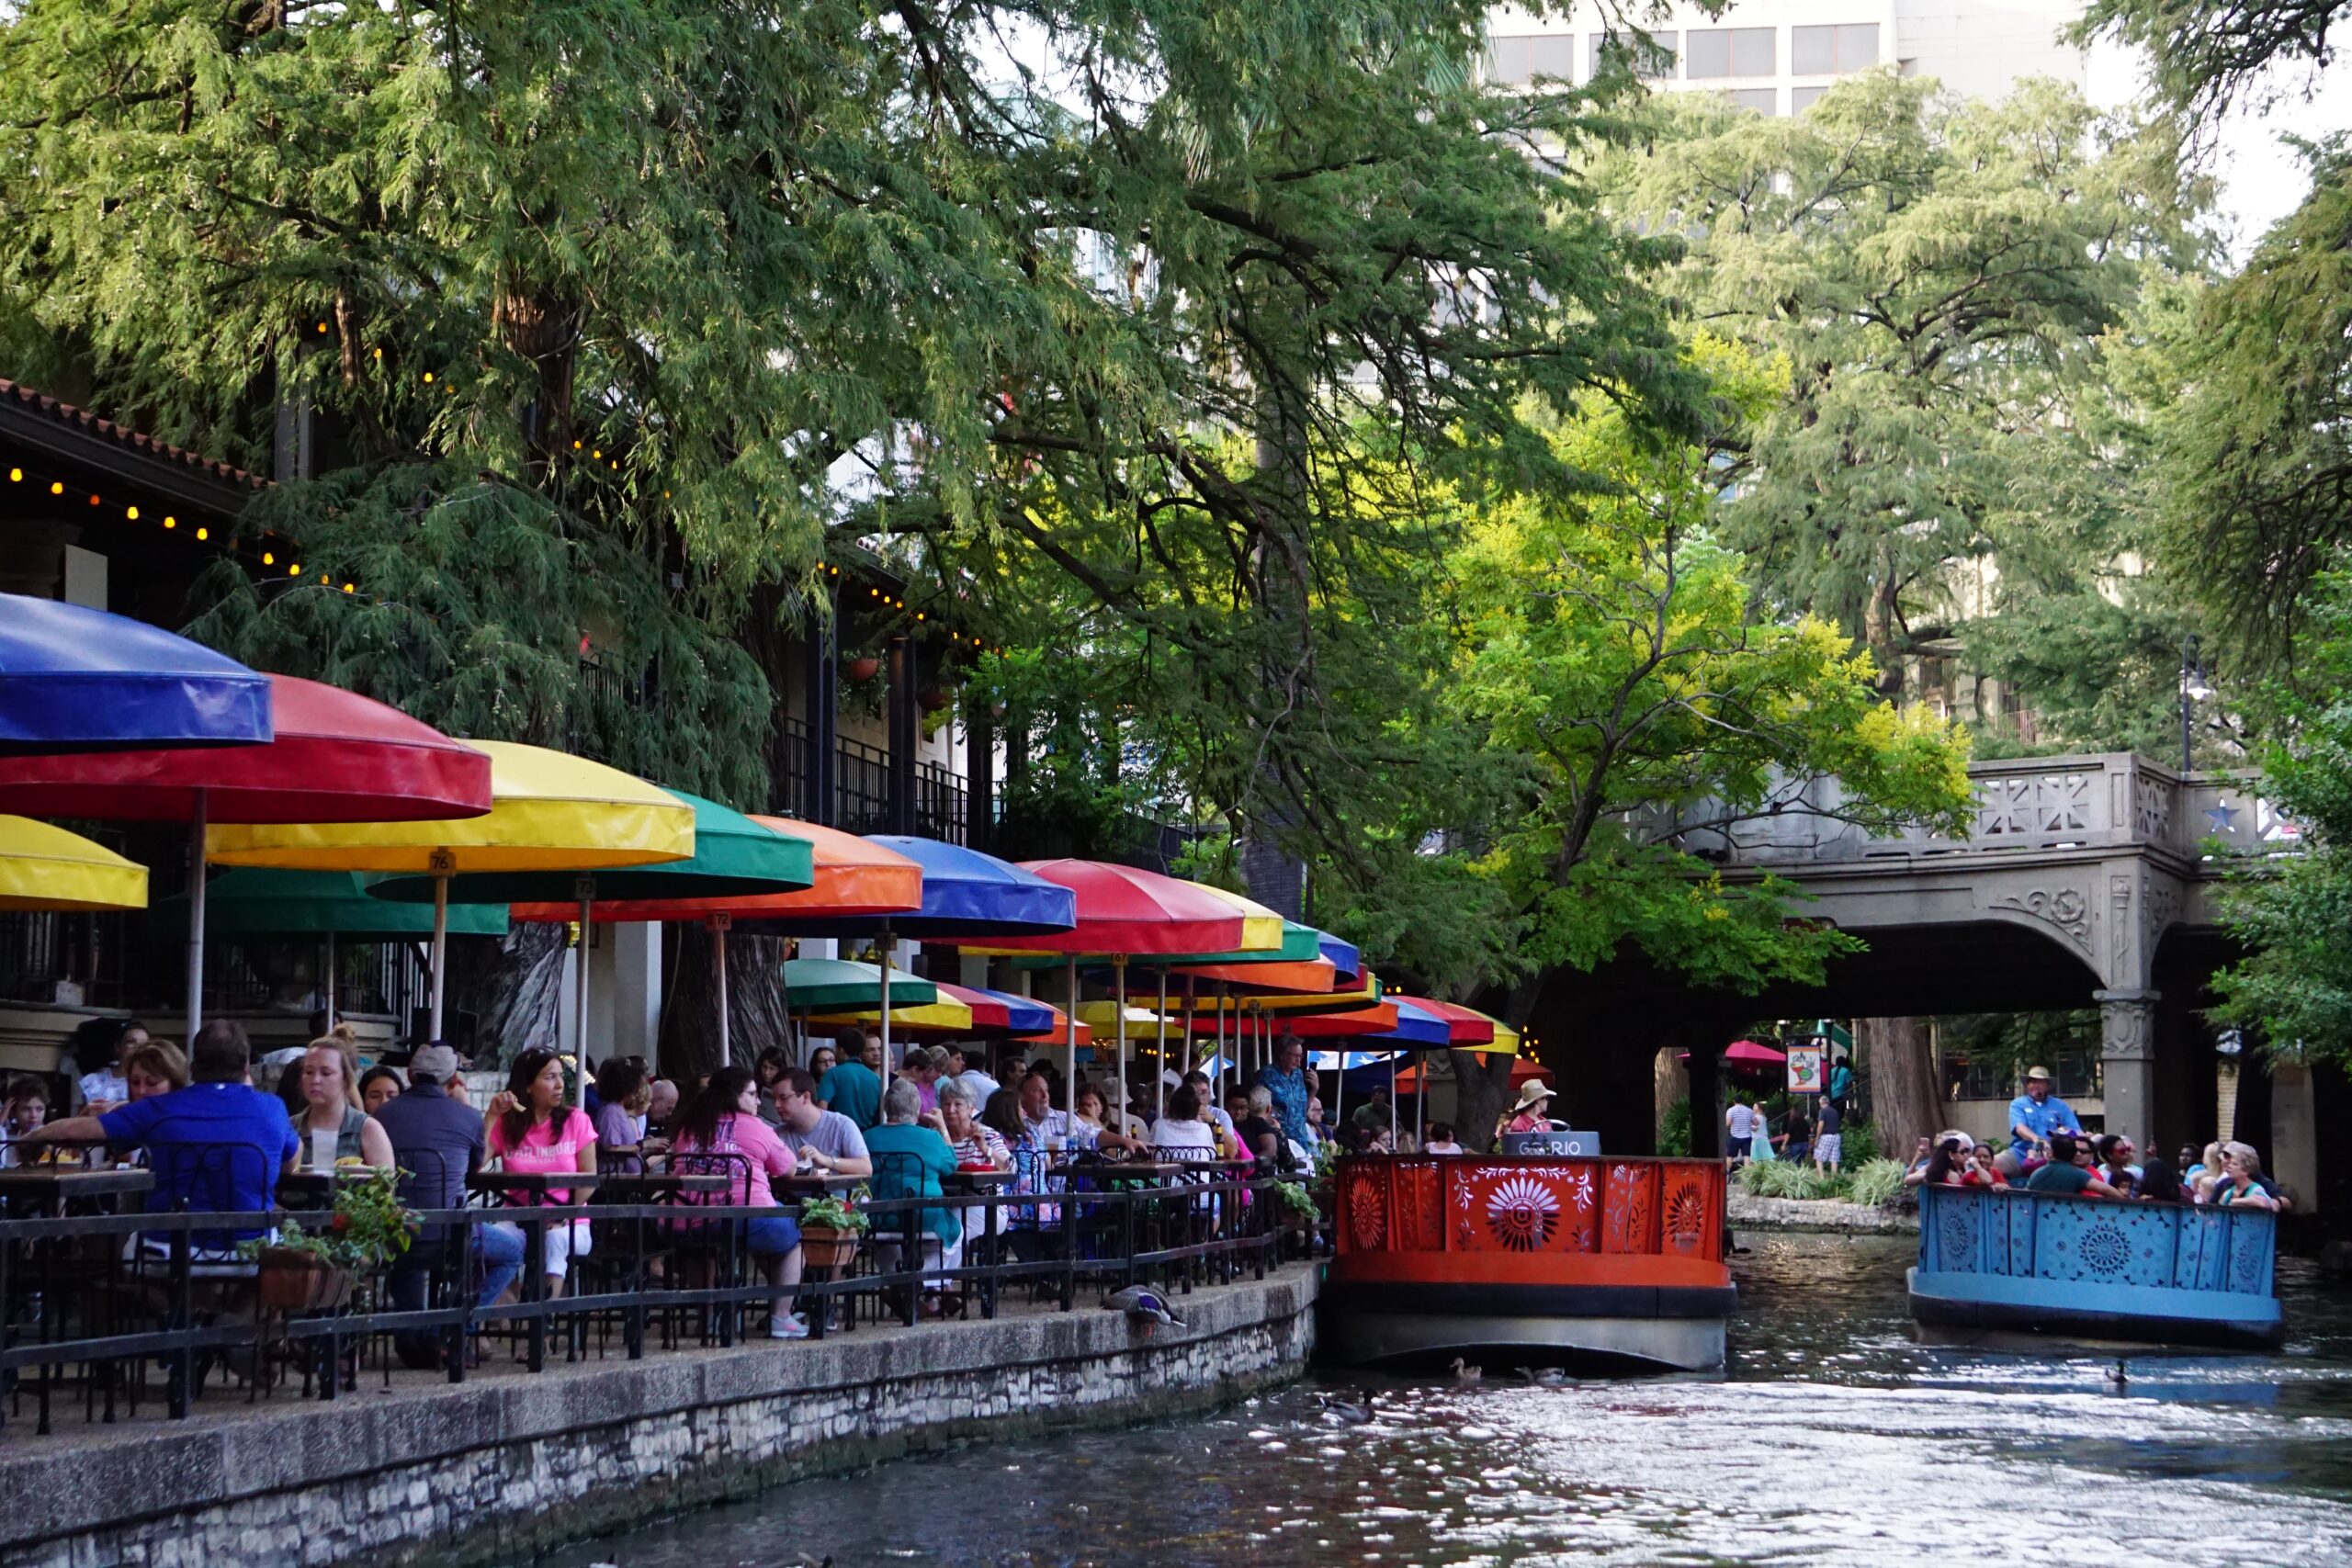 San Antonio is one of the best places in Texas for those who like the outdoor activities and parks. Pictured: The Riverwalk in San Antonio.